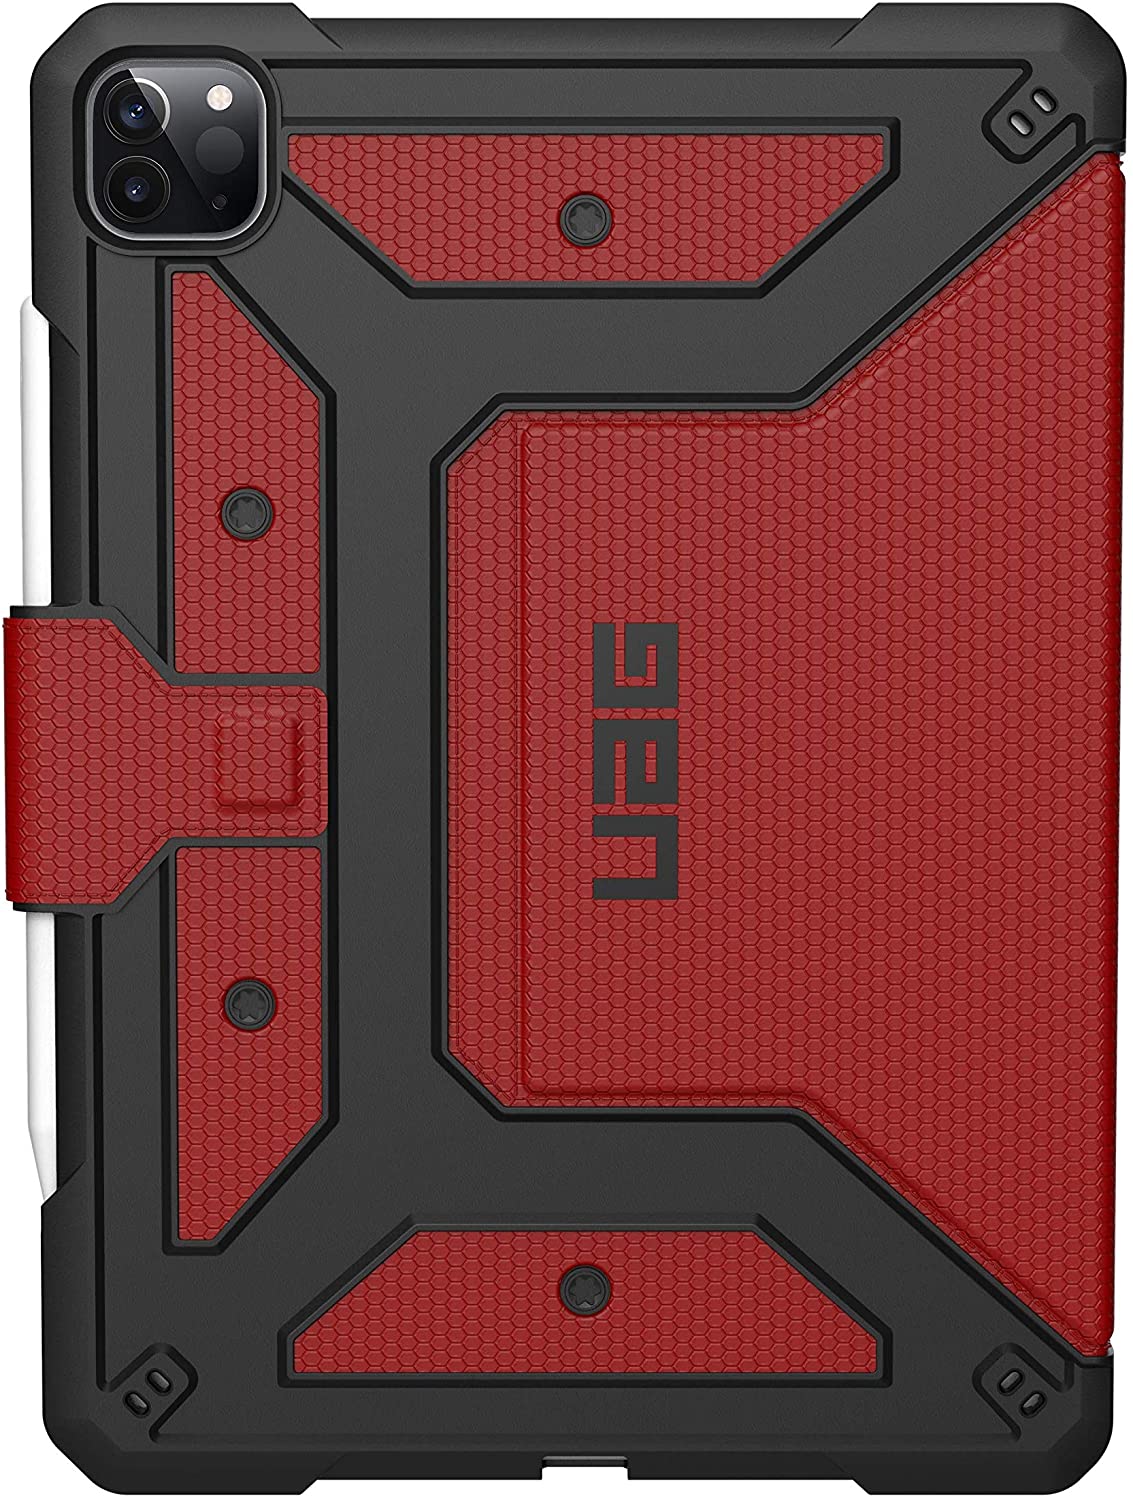 UAG iPad Pro 11 / 12.9 inch 2020 Case Metropolis Folio Slim Heavy-Duty Tough Multi-Viewing Angles Stand Military Drop Tested Rugged Protective Cover